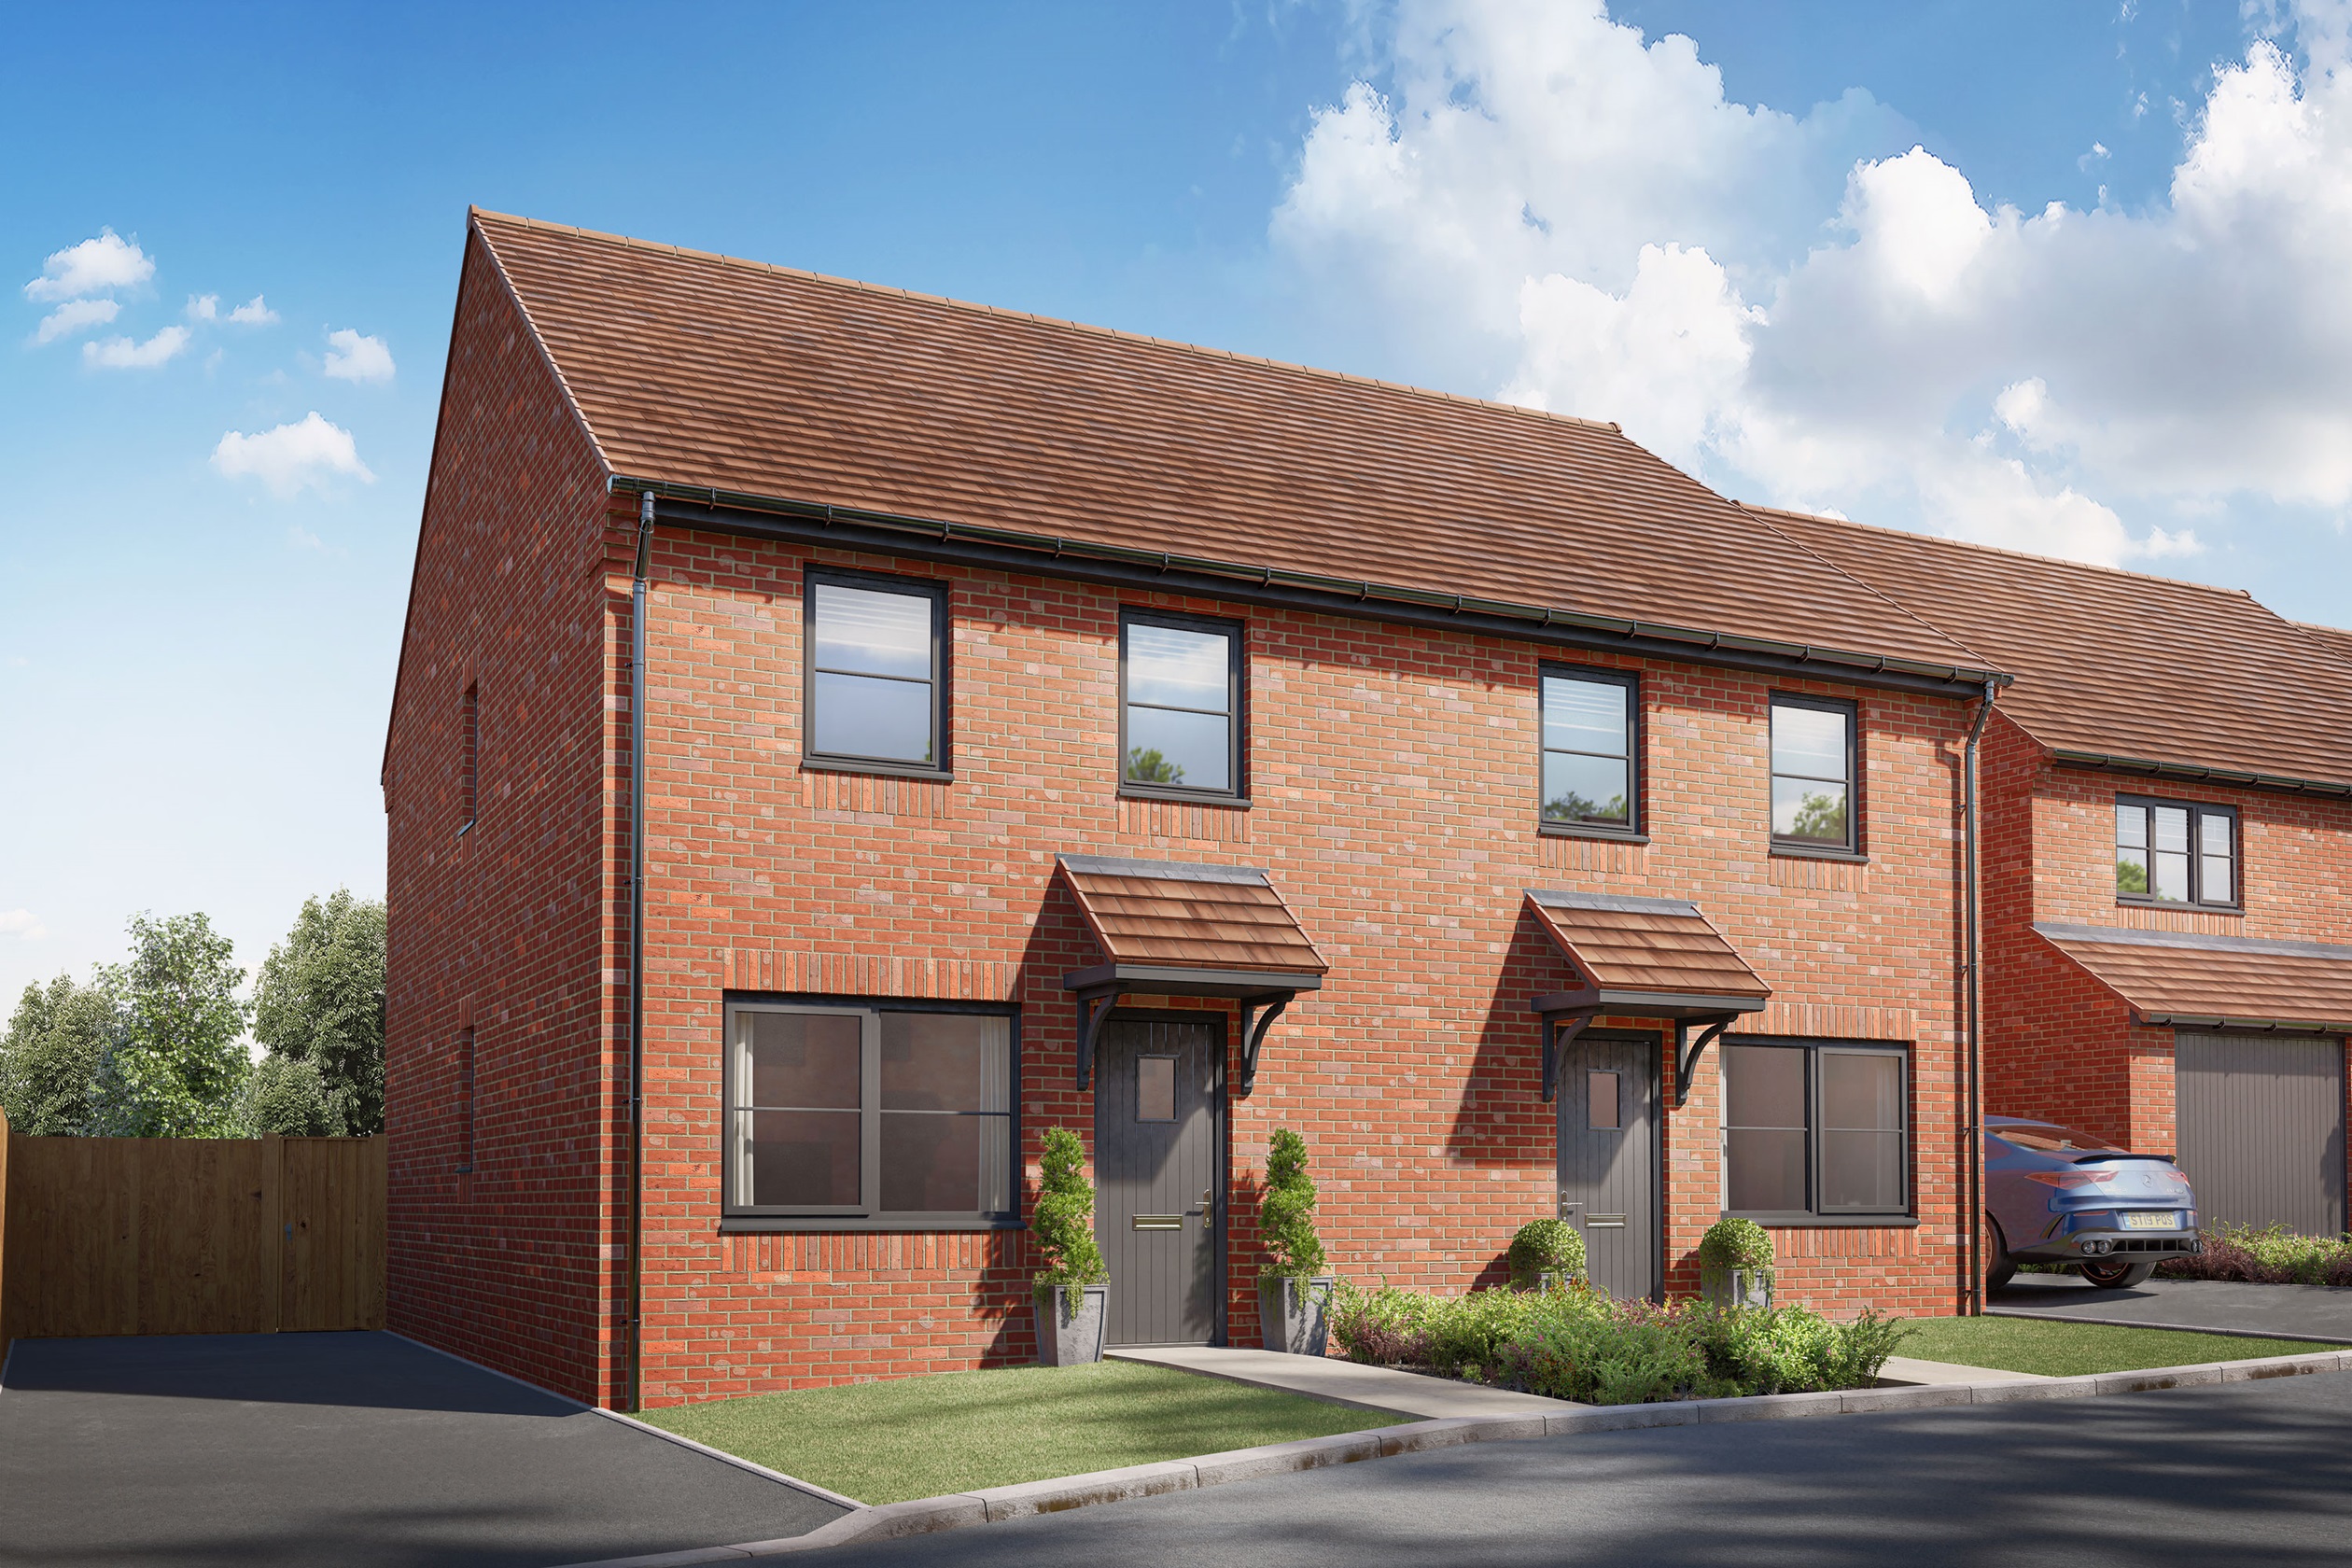 Property 1 of 9. Exterior CGI View Of Our 3 Bed Maidstone Home